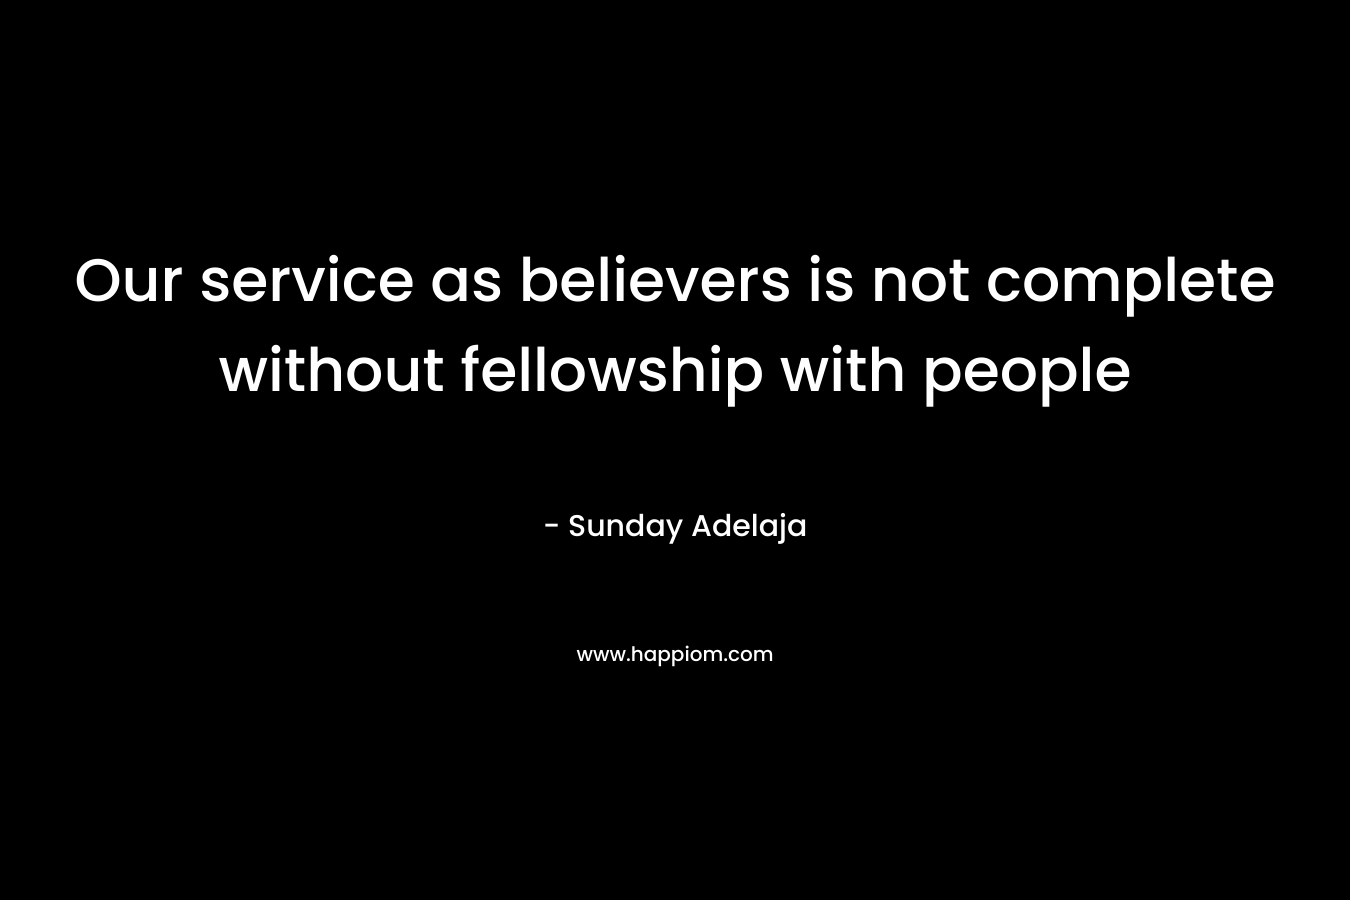 Our service as believers is not complete without fellowship with people